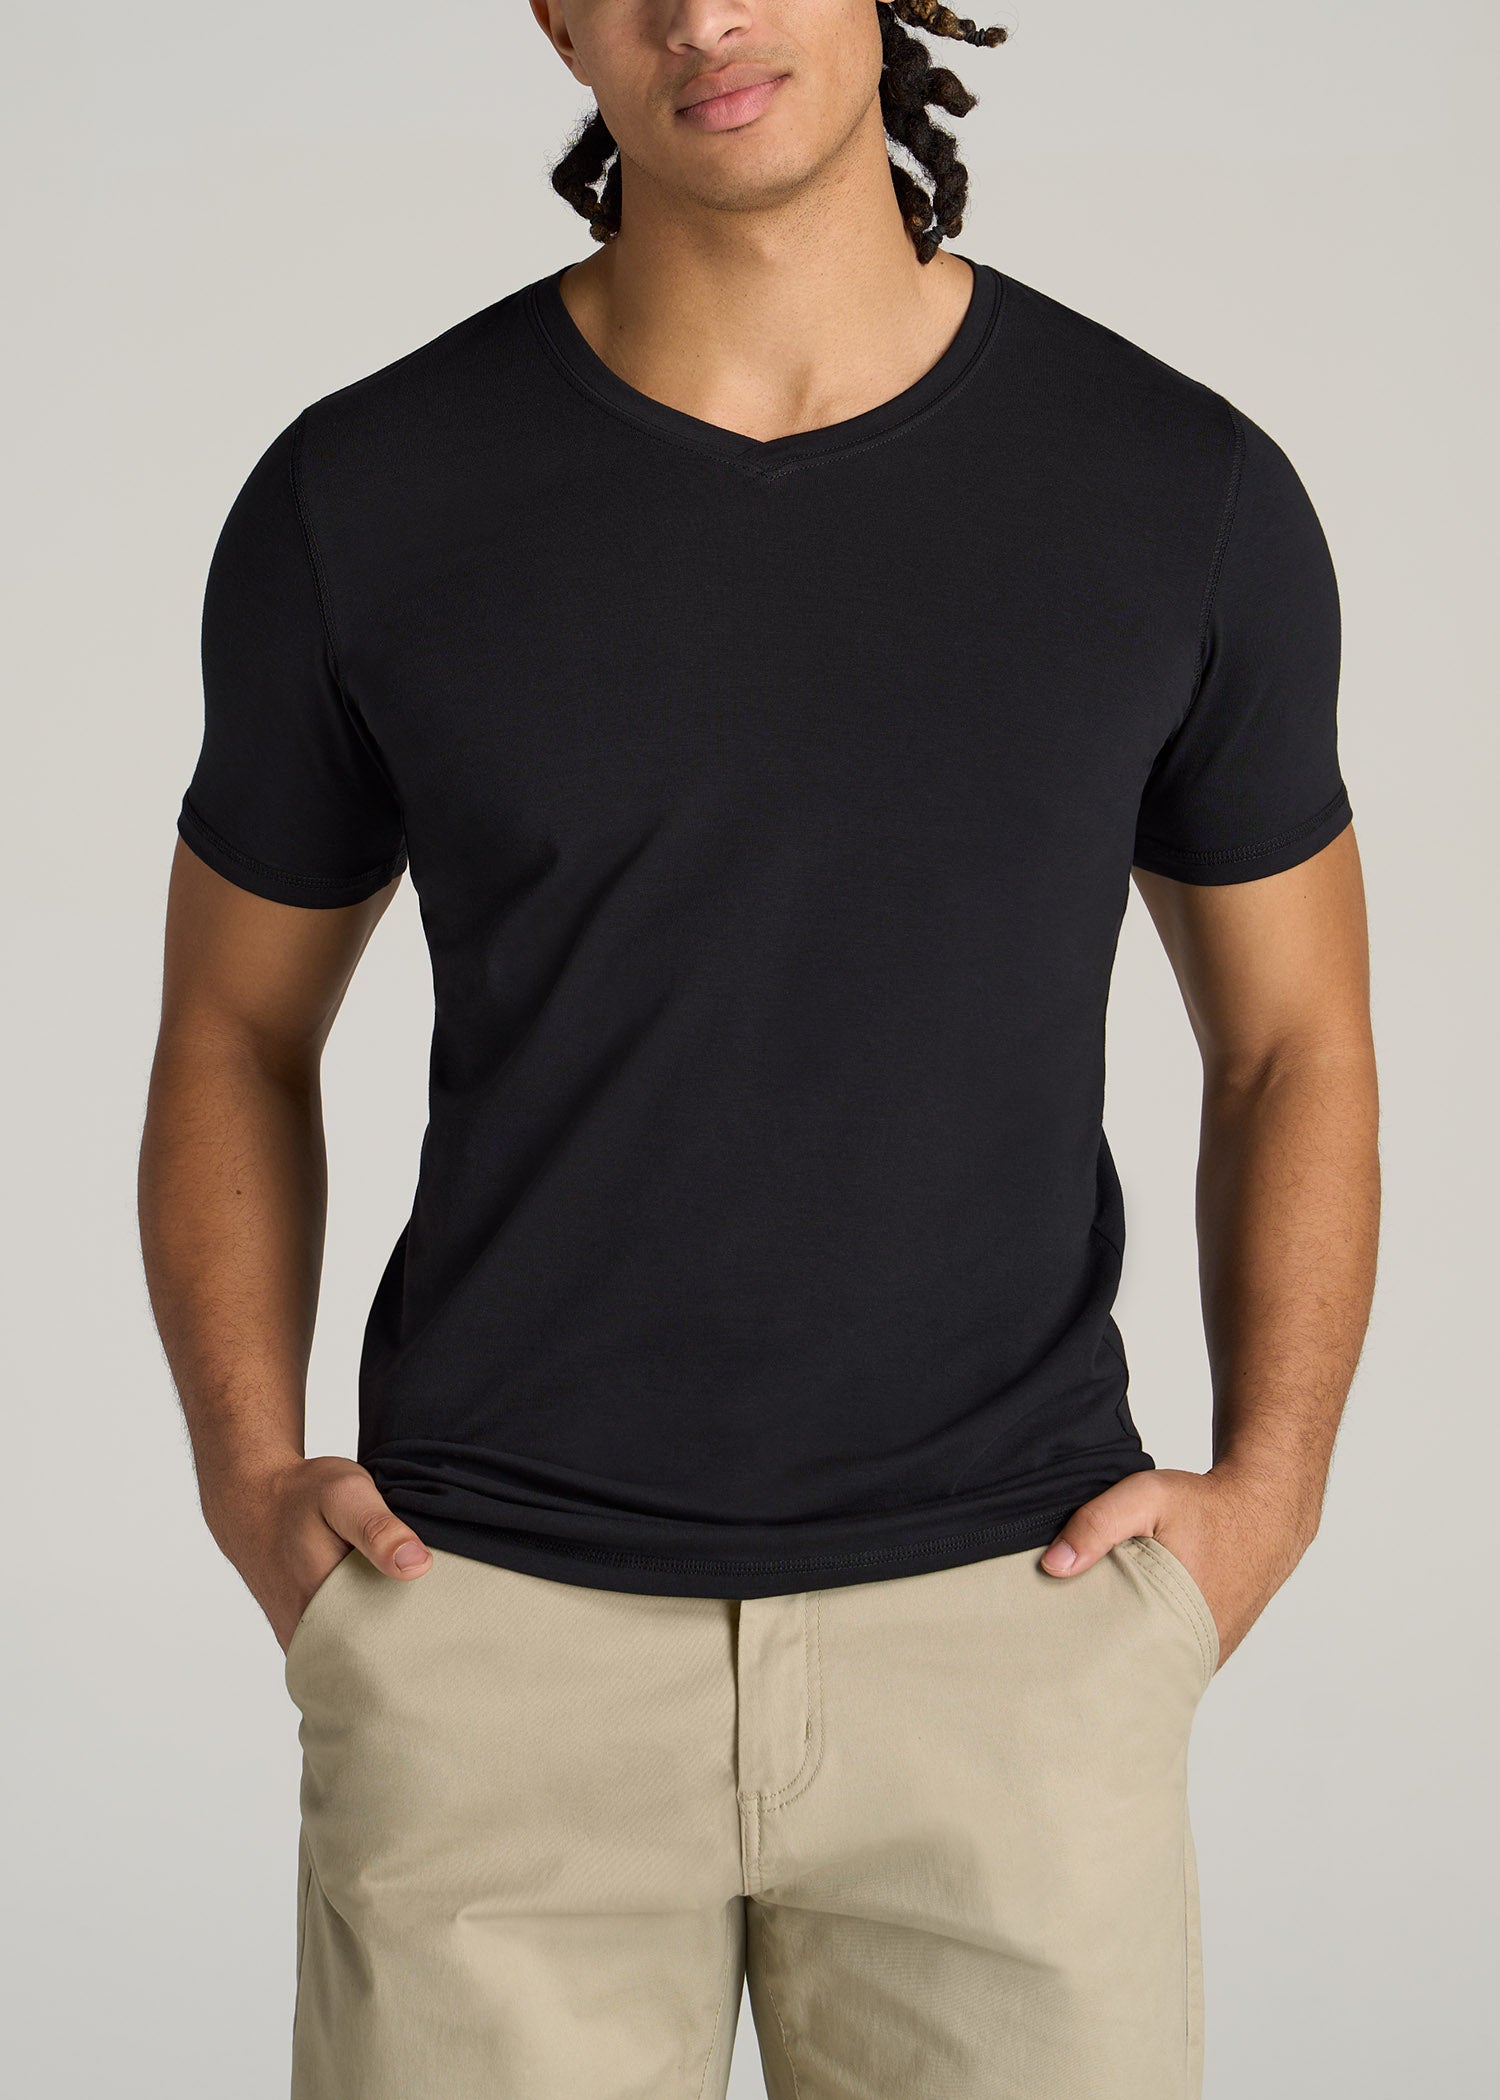 Best T-Shirts For Slim Guys  Which T-shirt is Best for Skinny